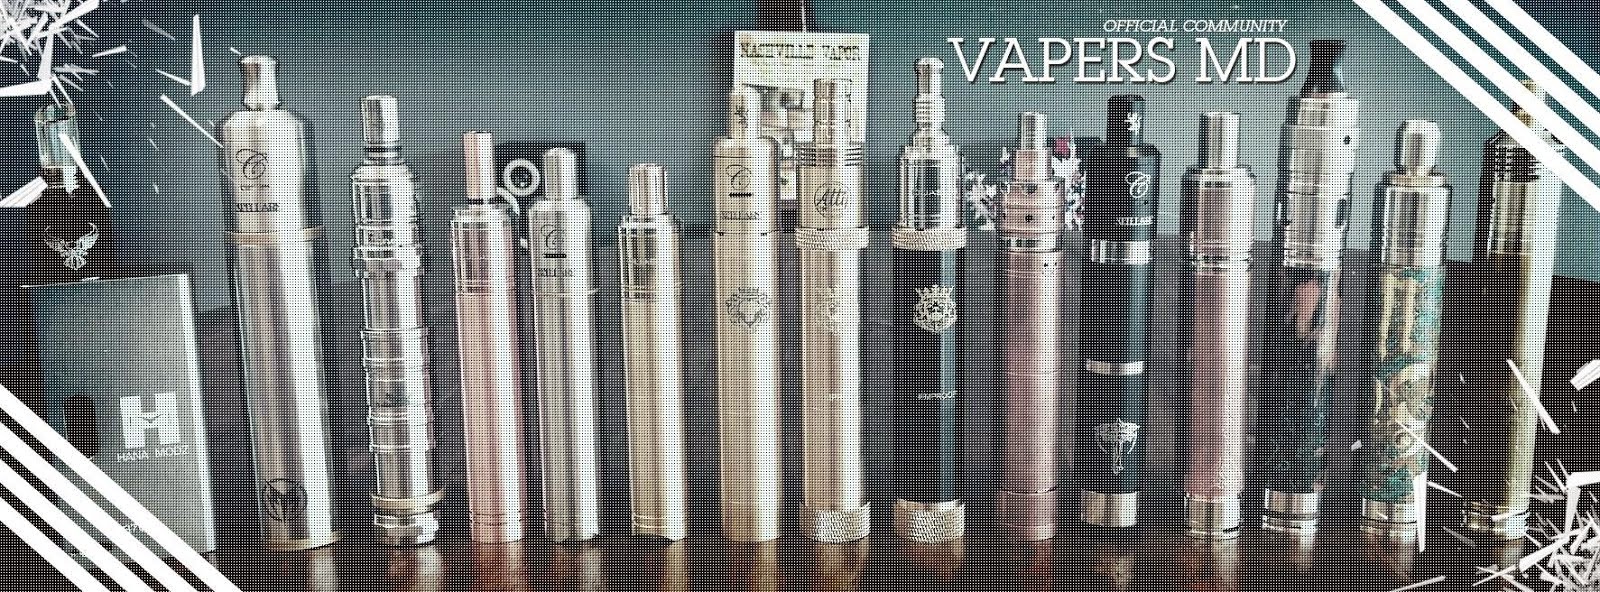 Vapers MD